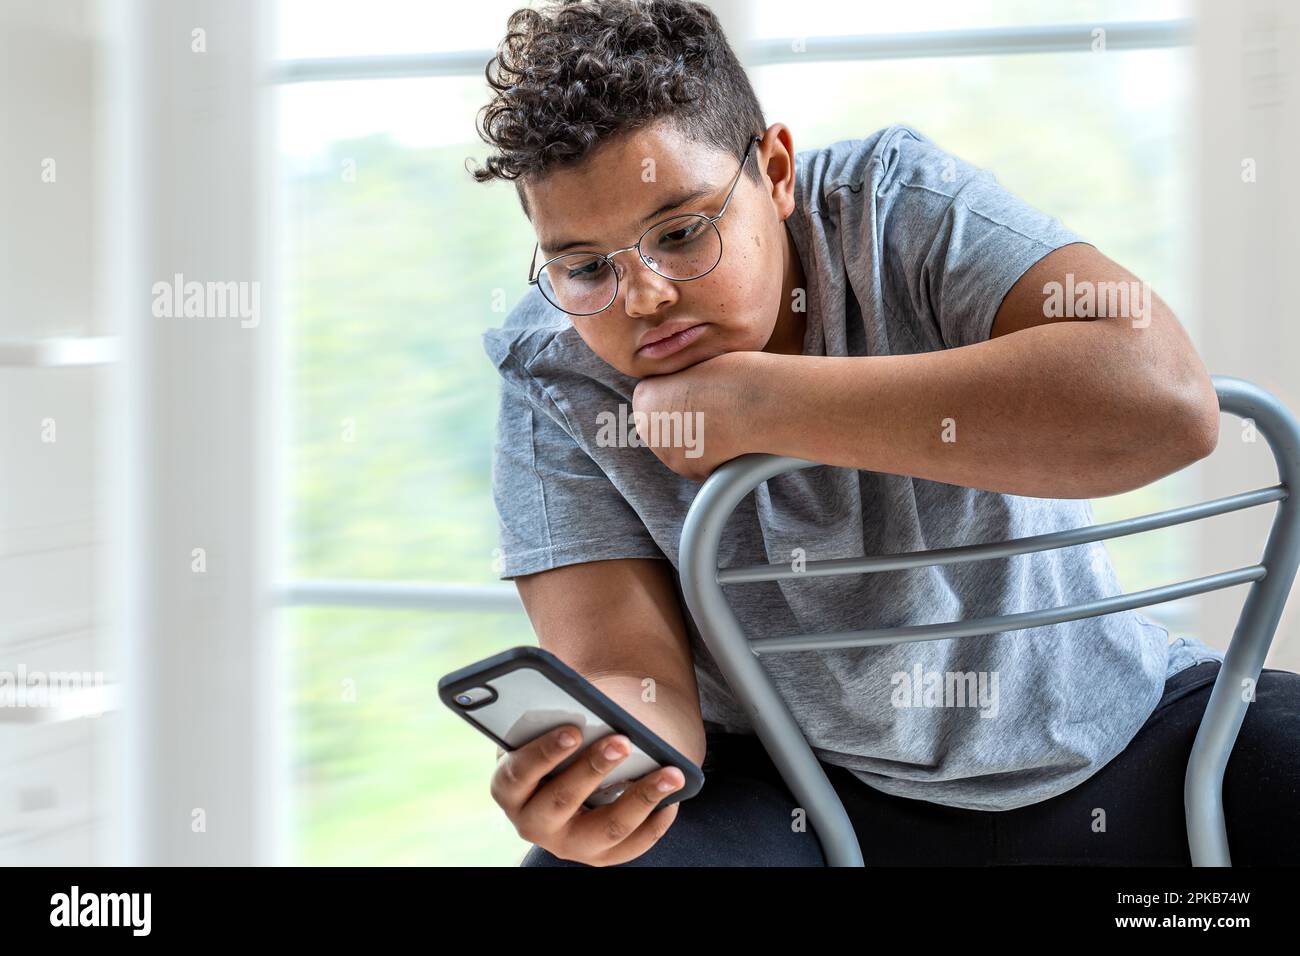 Young mixed race woman texting. Stock Photo